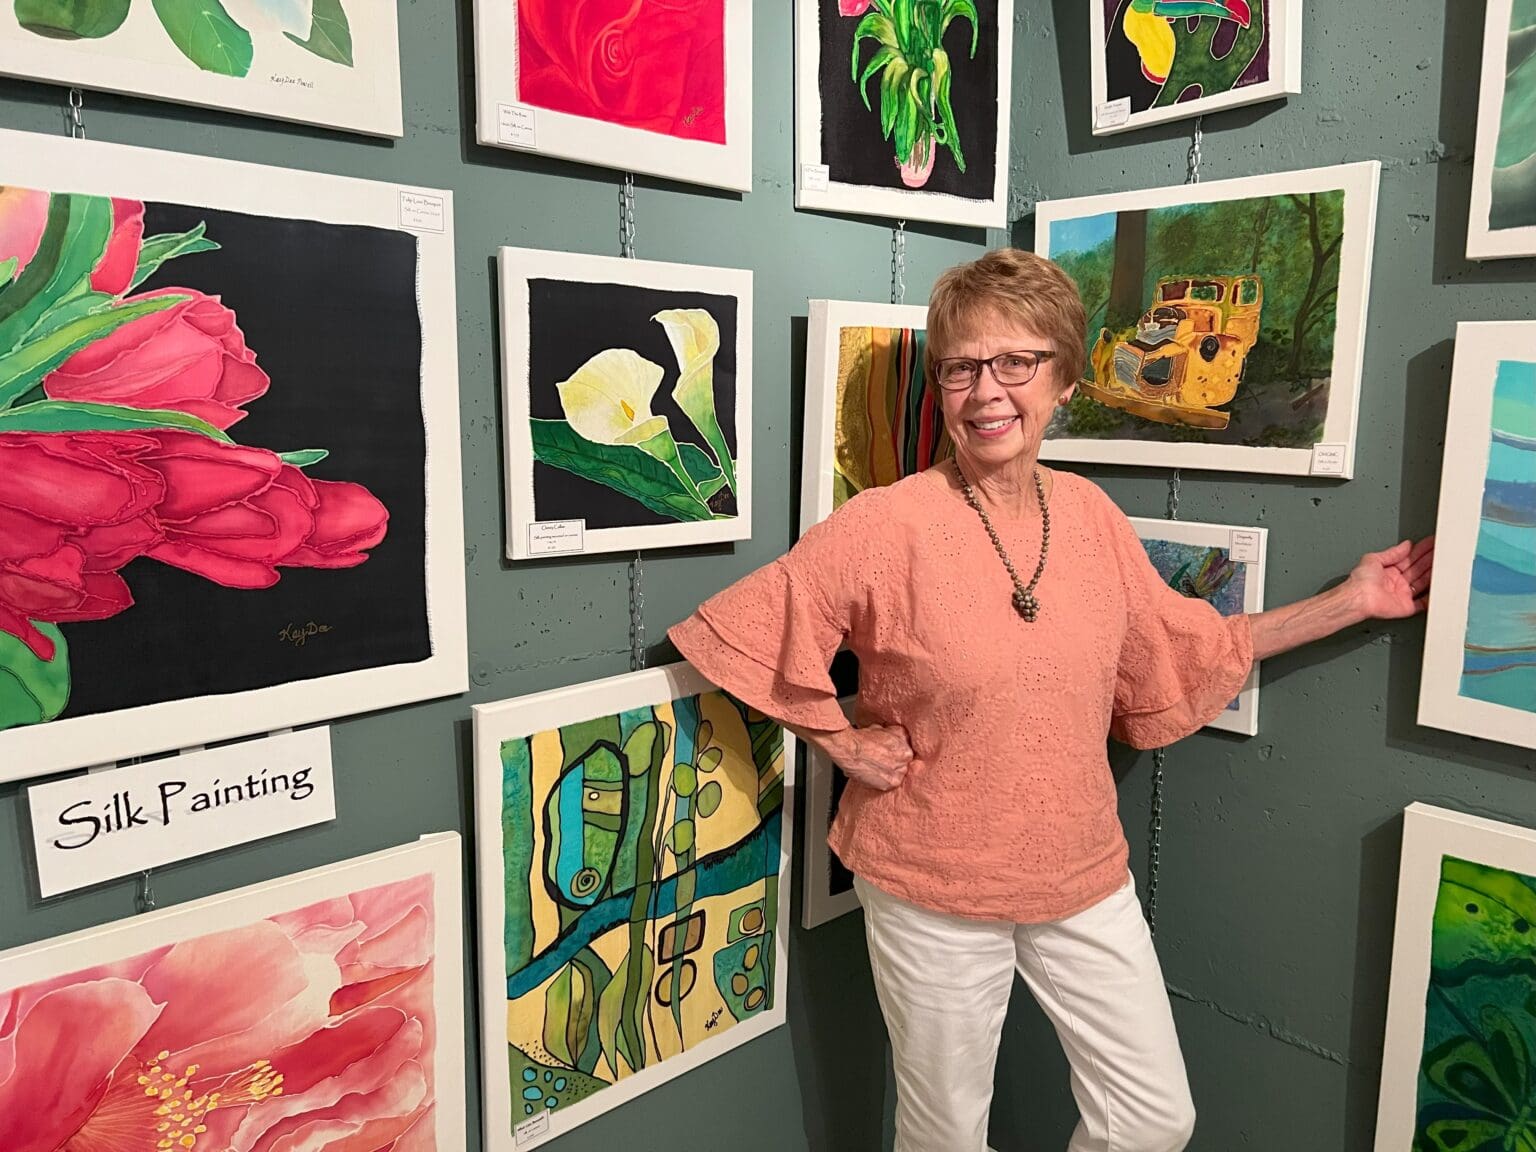 Kay Dee Powell will be showing at her home studio in Blaine as part of the Wave Studio Art Tour taking place Aug. 26–27 at various studios and businesses throughout Blaine